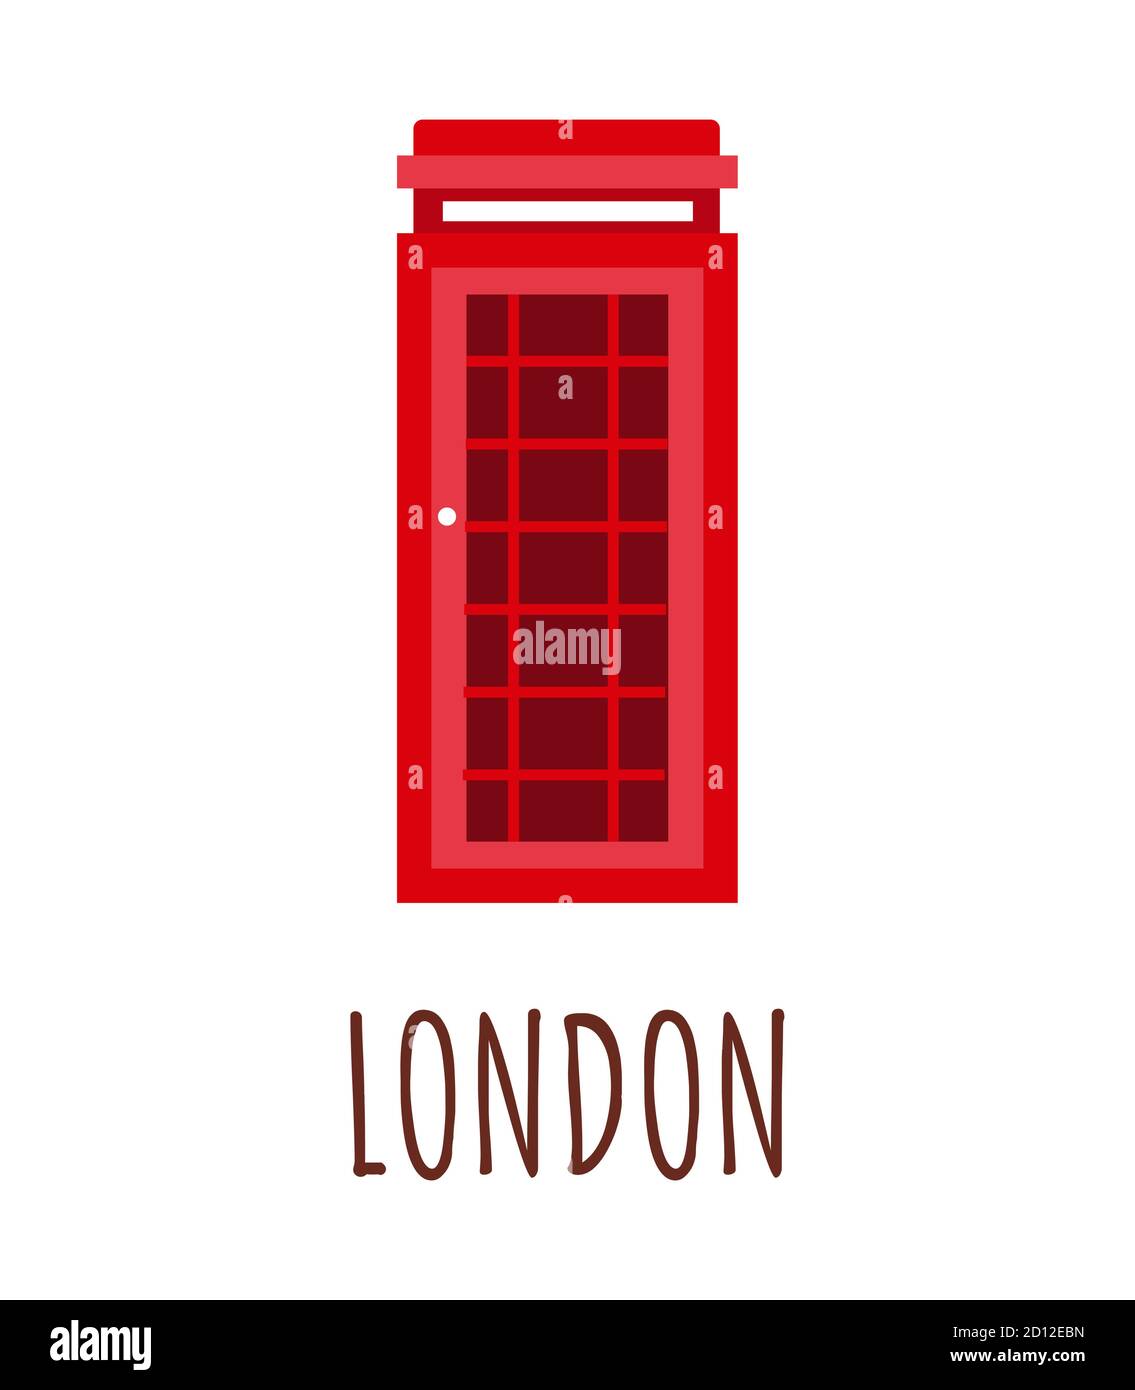 England, London red phone booth vector illustration with lettering London. Image of phone box. Isolated on white background. British traditional Stock Vector